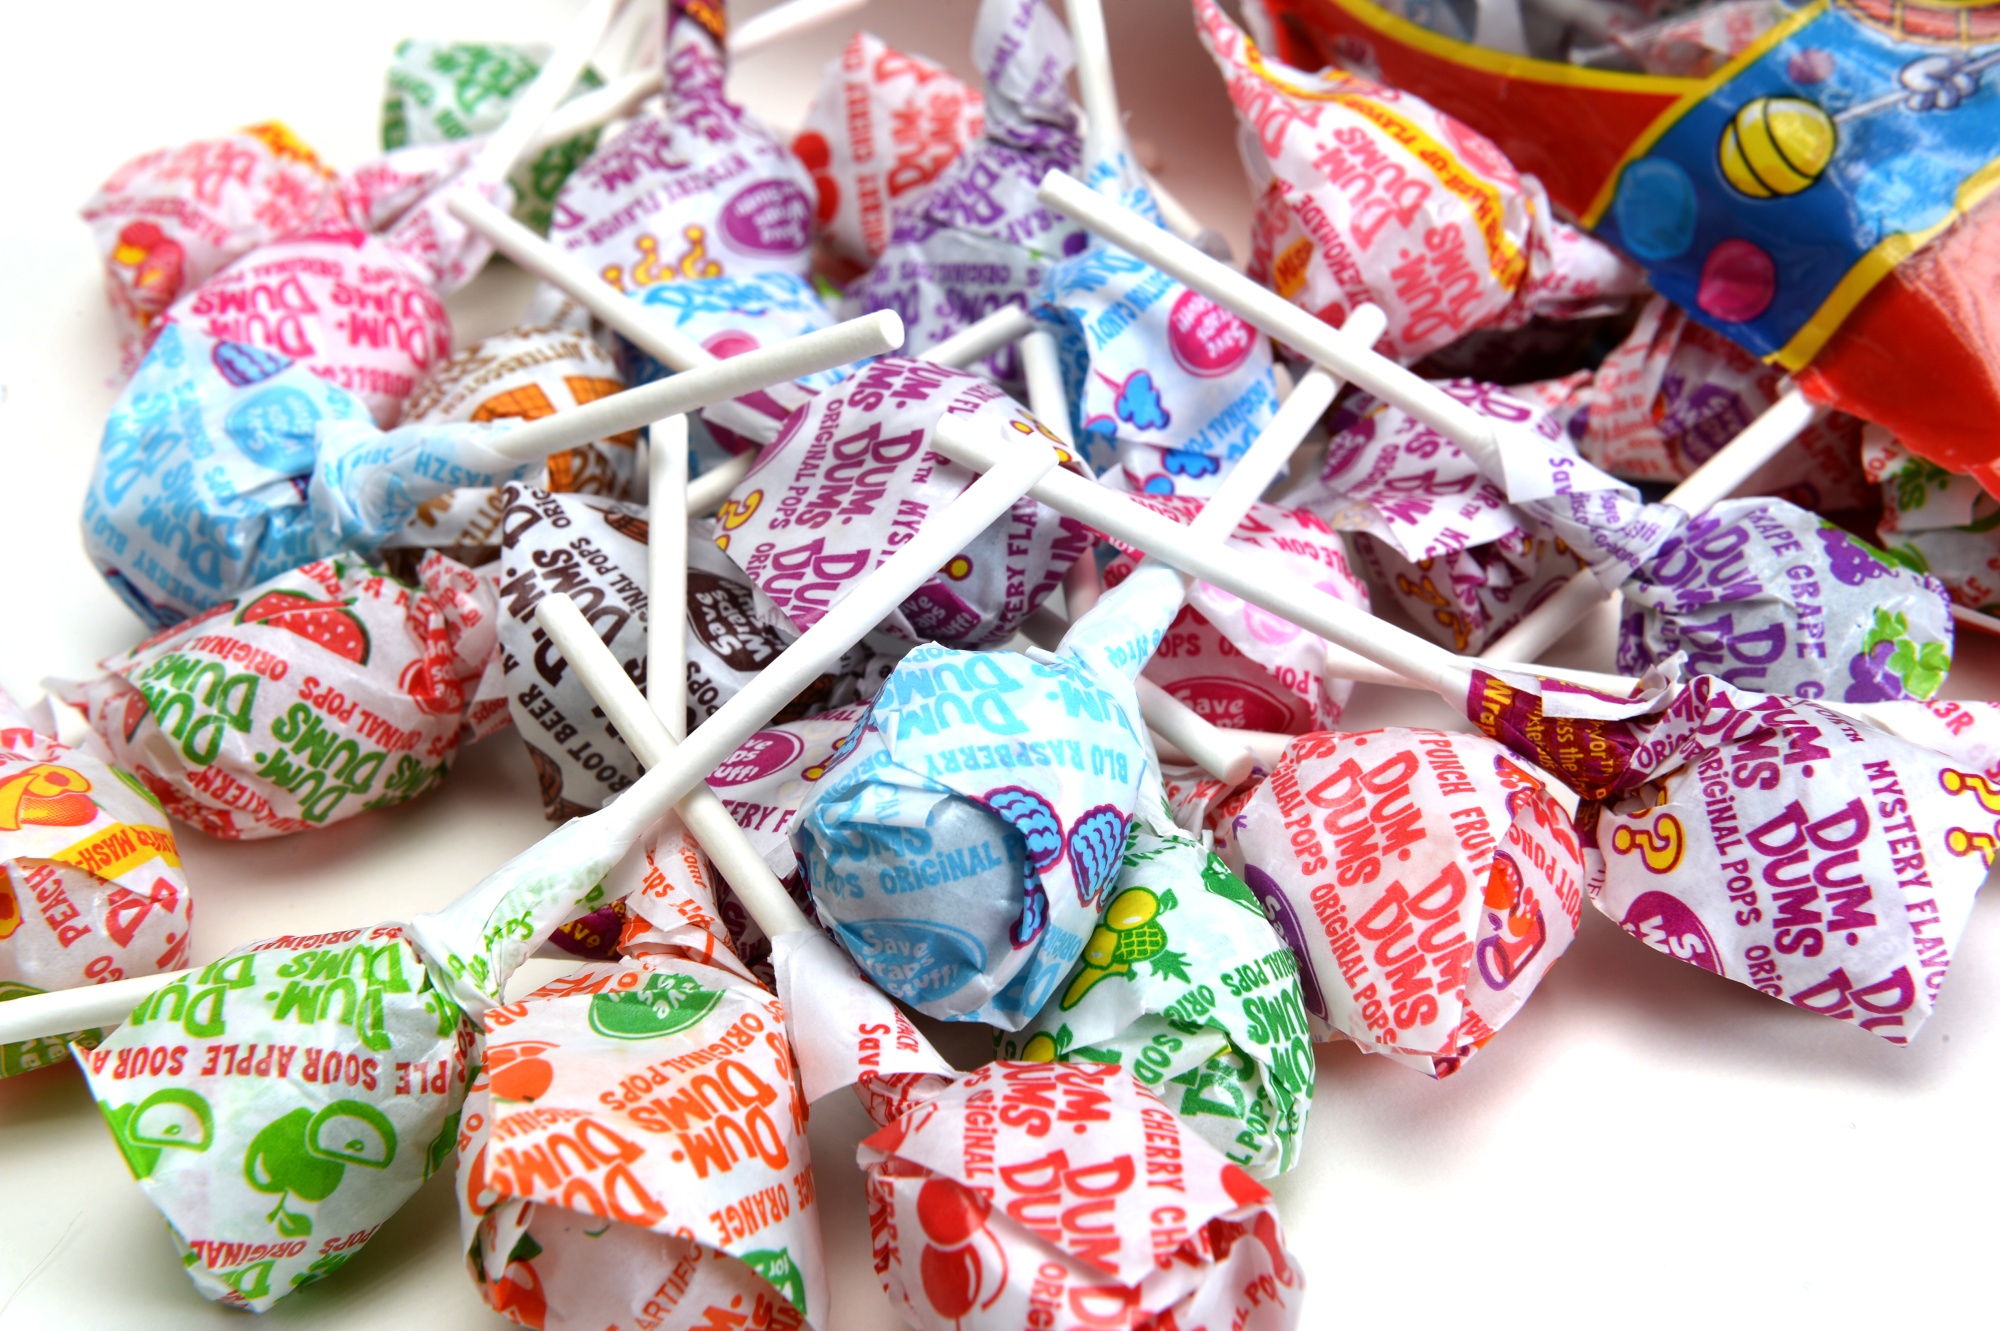 Merchants are&nbsp;selling Dum Dums on Amazon.com for a couple of bucks less than the usual&nbsp;price by selling them direct from other&nbsp;retailers such as&nbsp;Walmart Inc.’s Sam’s Club.